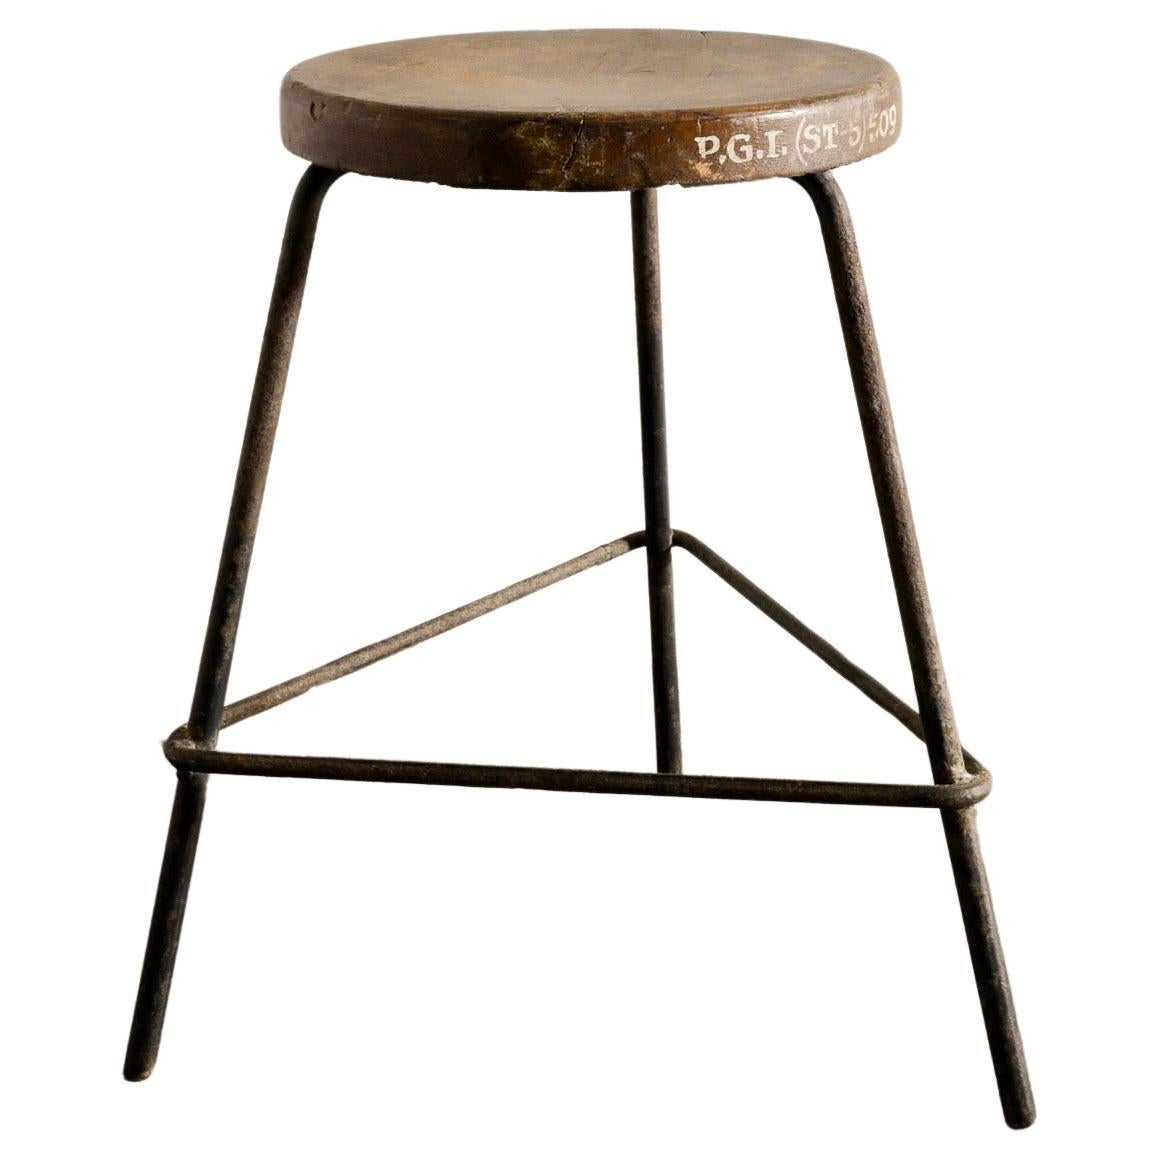 Mid Century Pierre Jeanneret Stool in Teak & Iron Produced for Chandigarh, 1950s